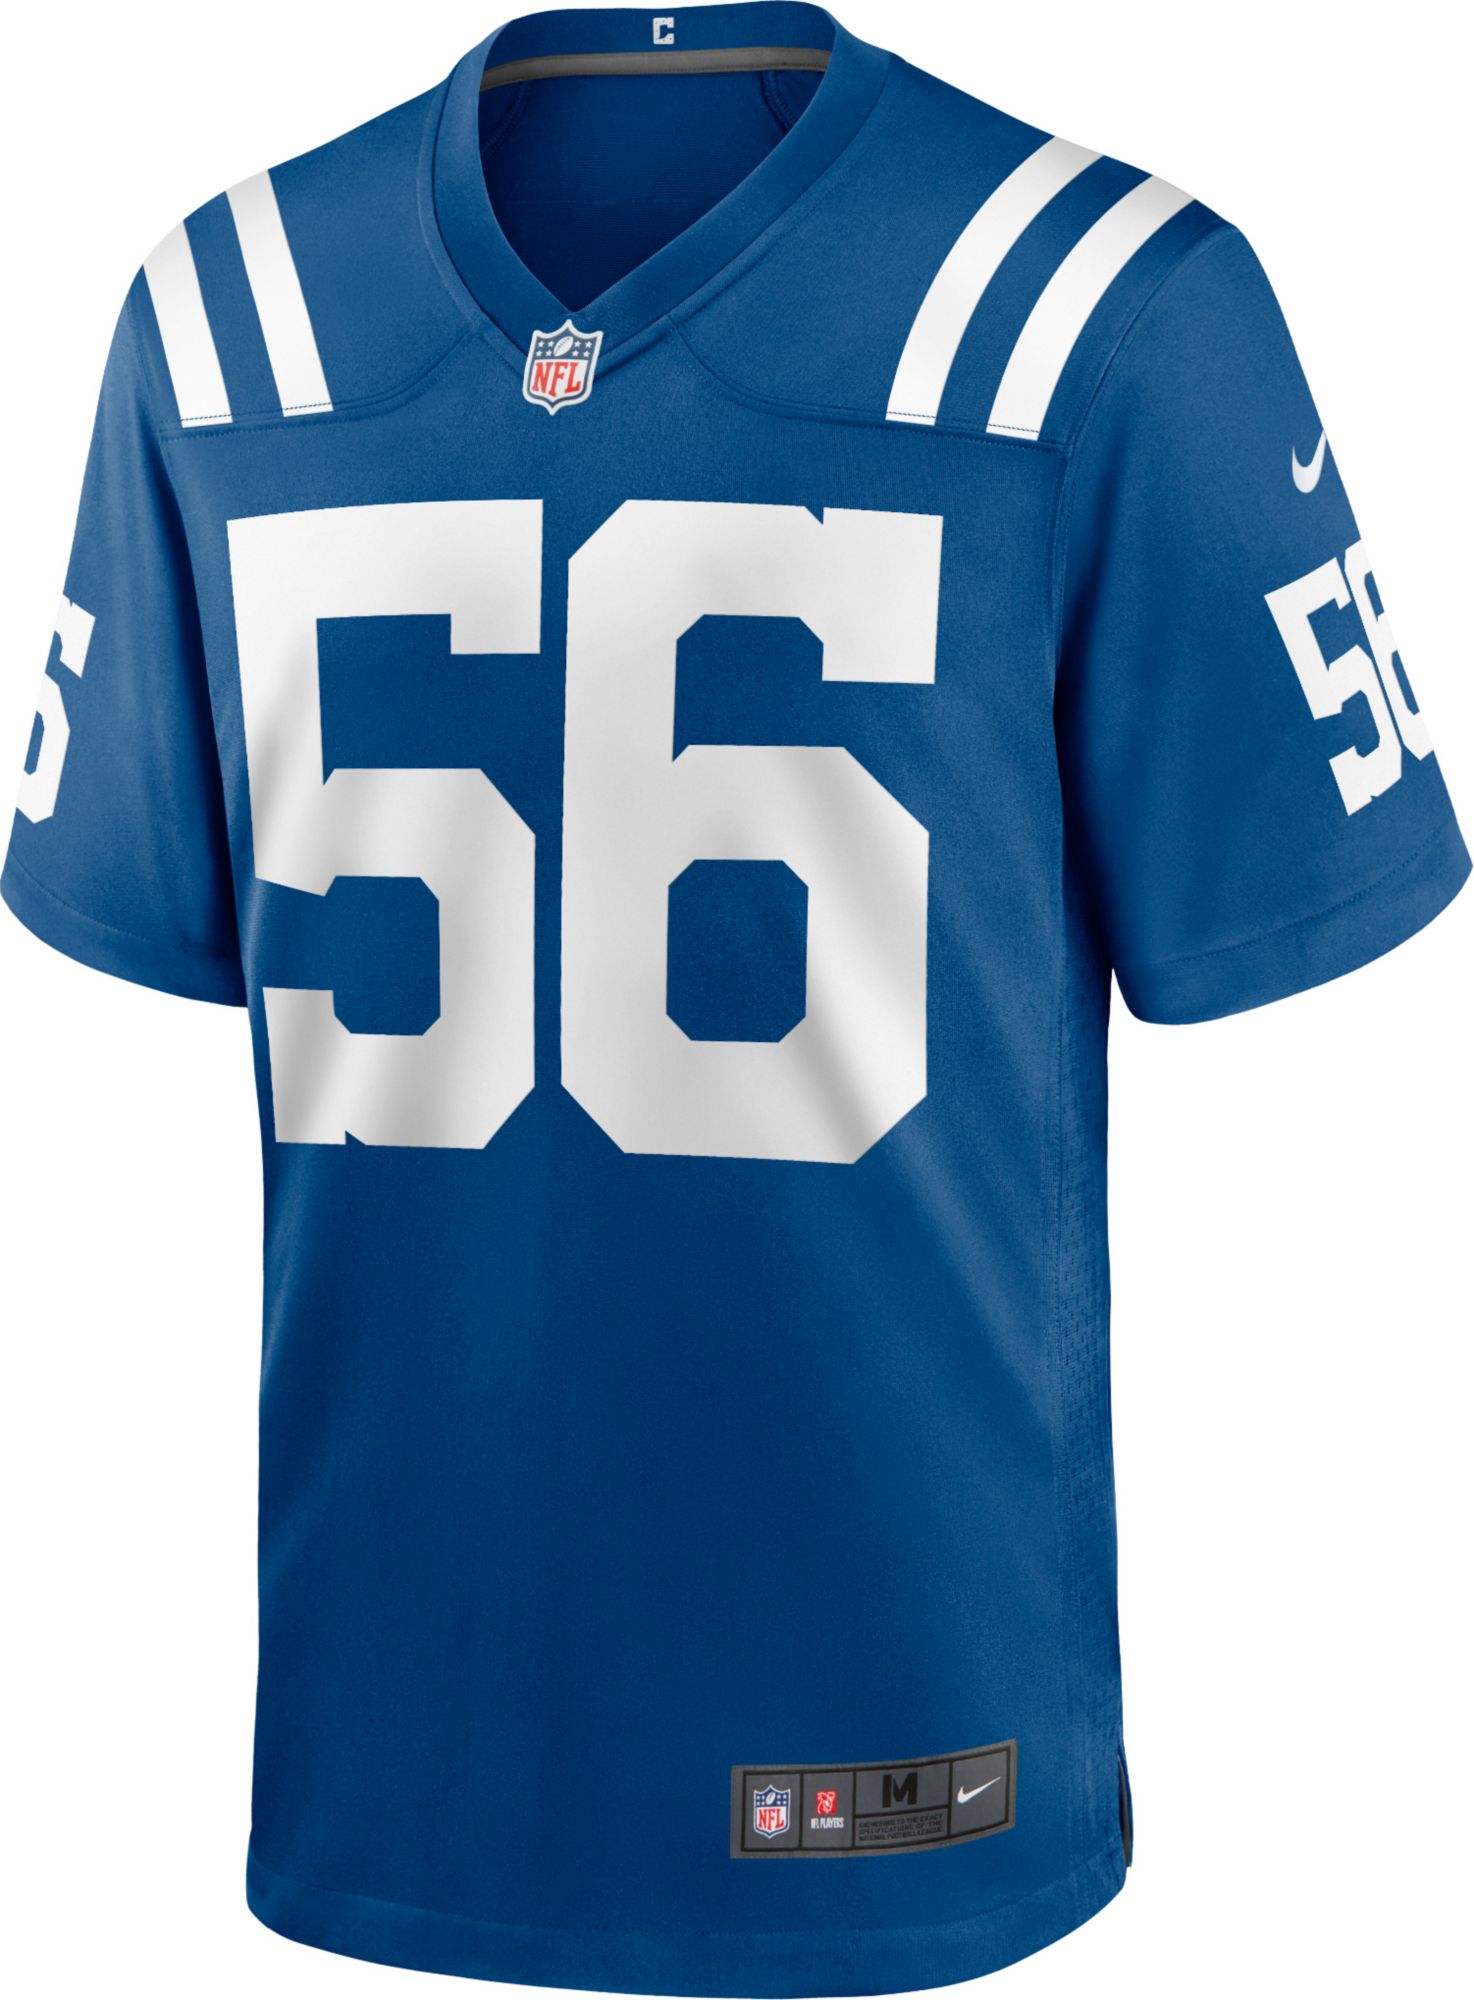 Indianapolis Colts No56 Quenton Nelson Men's Nike White 2020 Vapor Limited Jersey